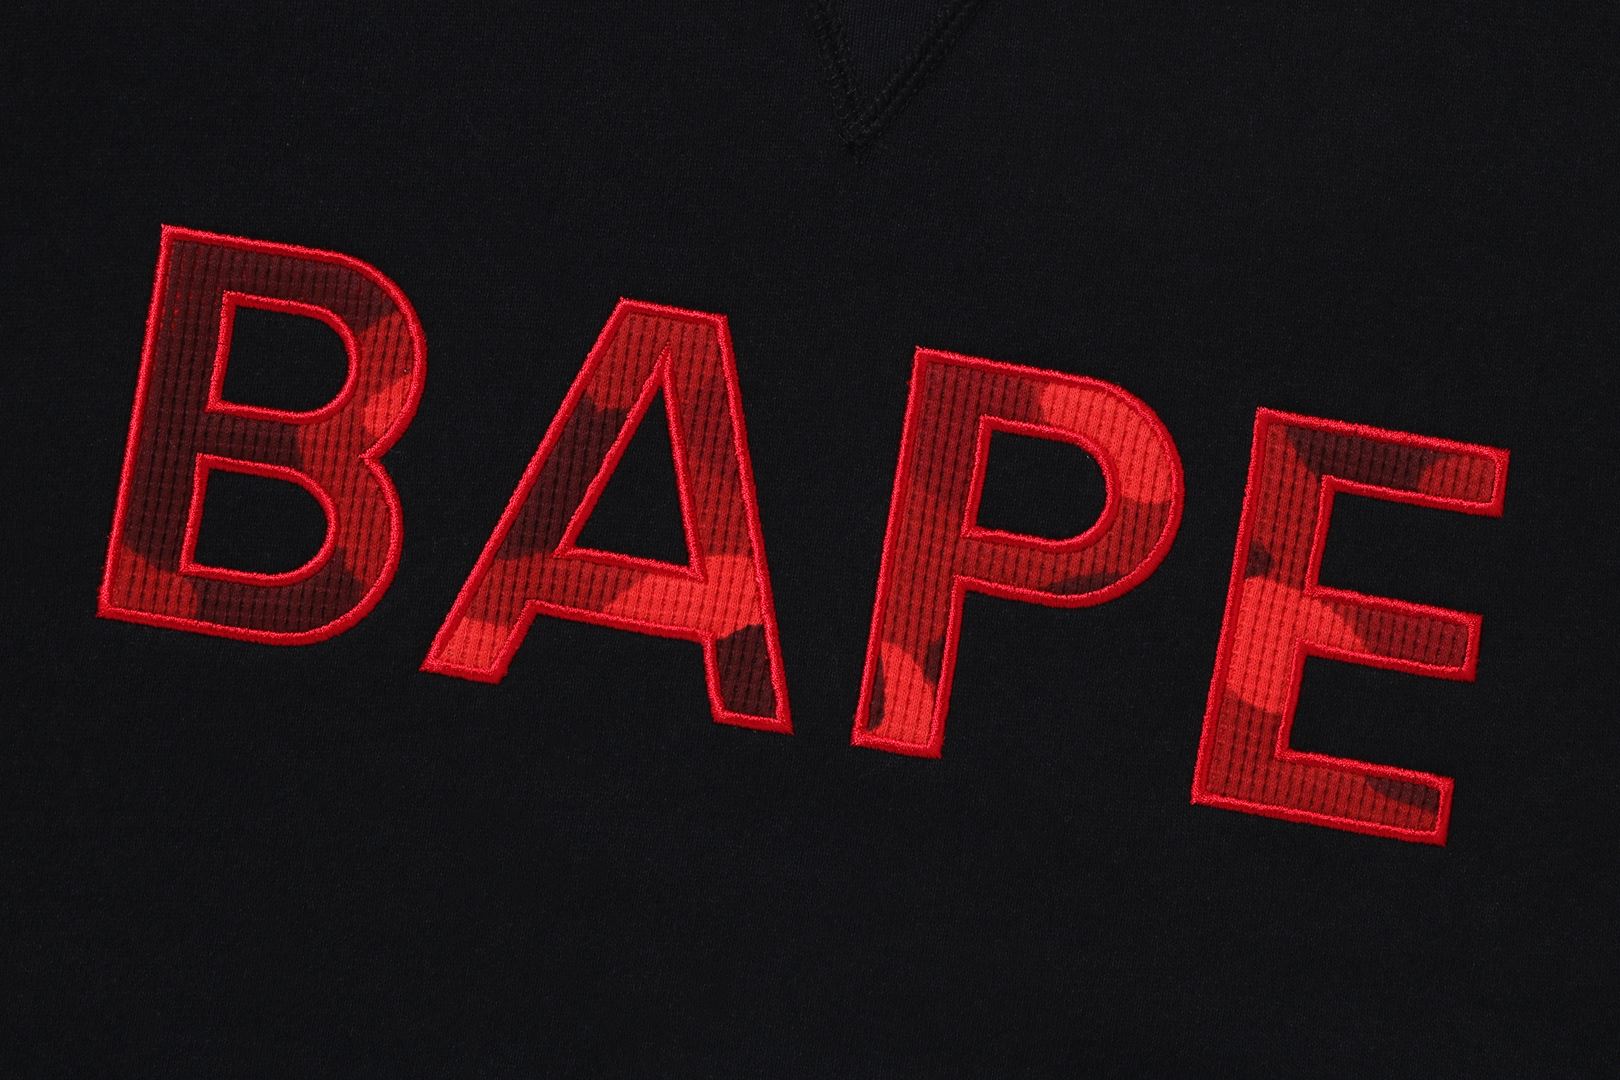 BAPE PATCH RELAXED FIT CREWNECK image